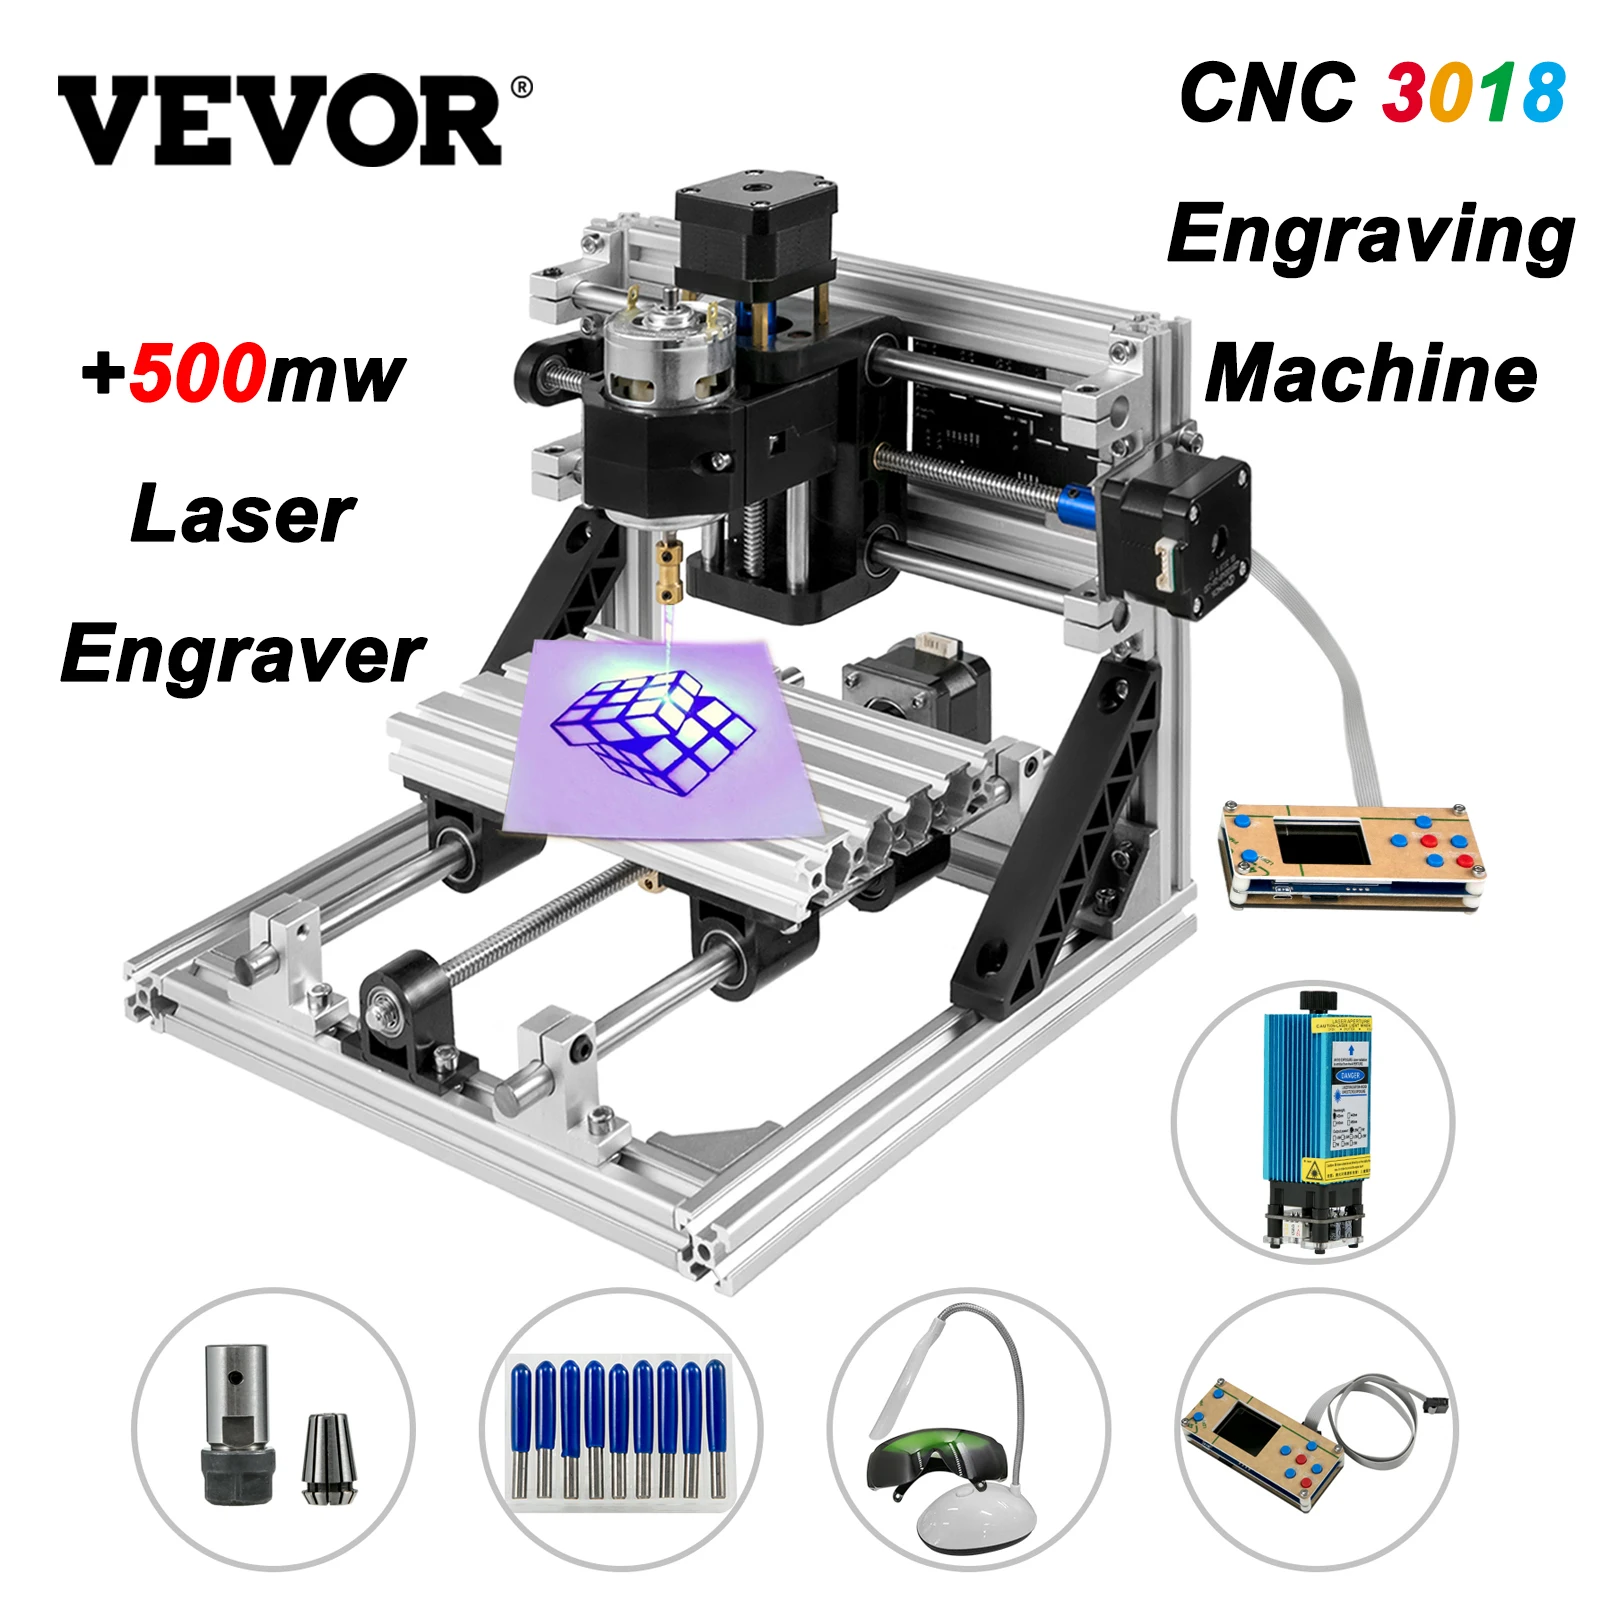 500MW Laser With Offline Controller Engraver Machine 3 Axis CNC Router 3018 